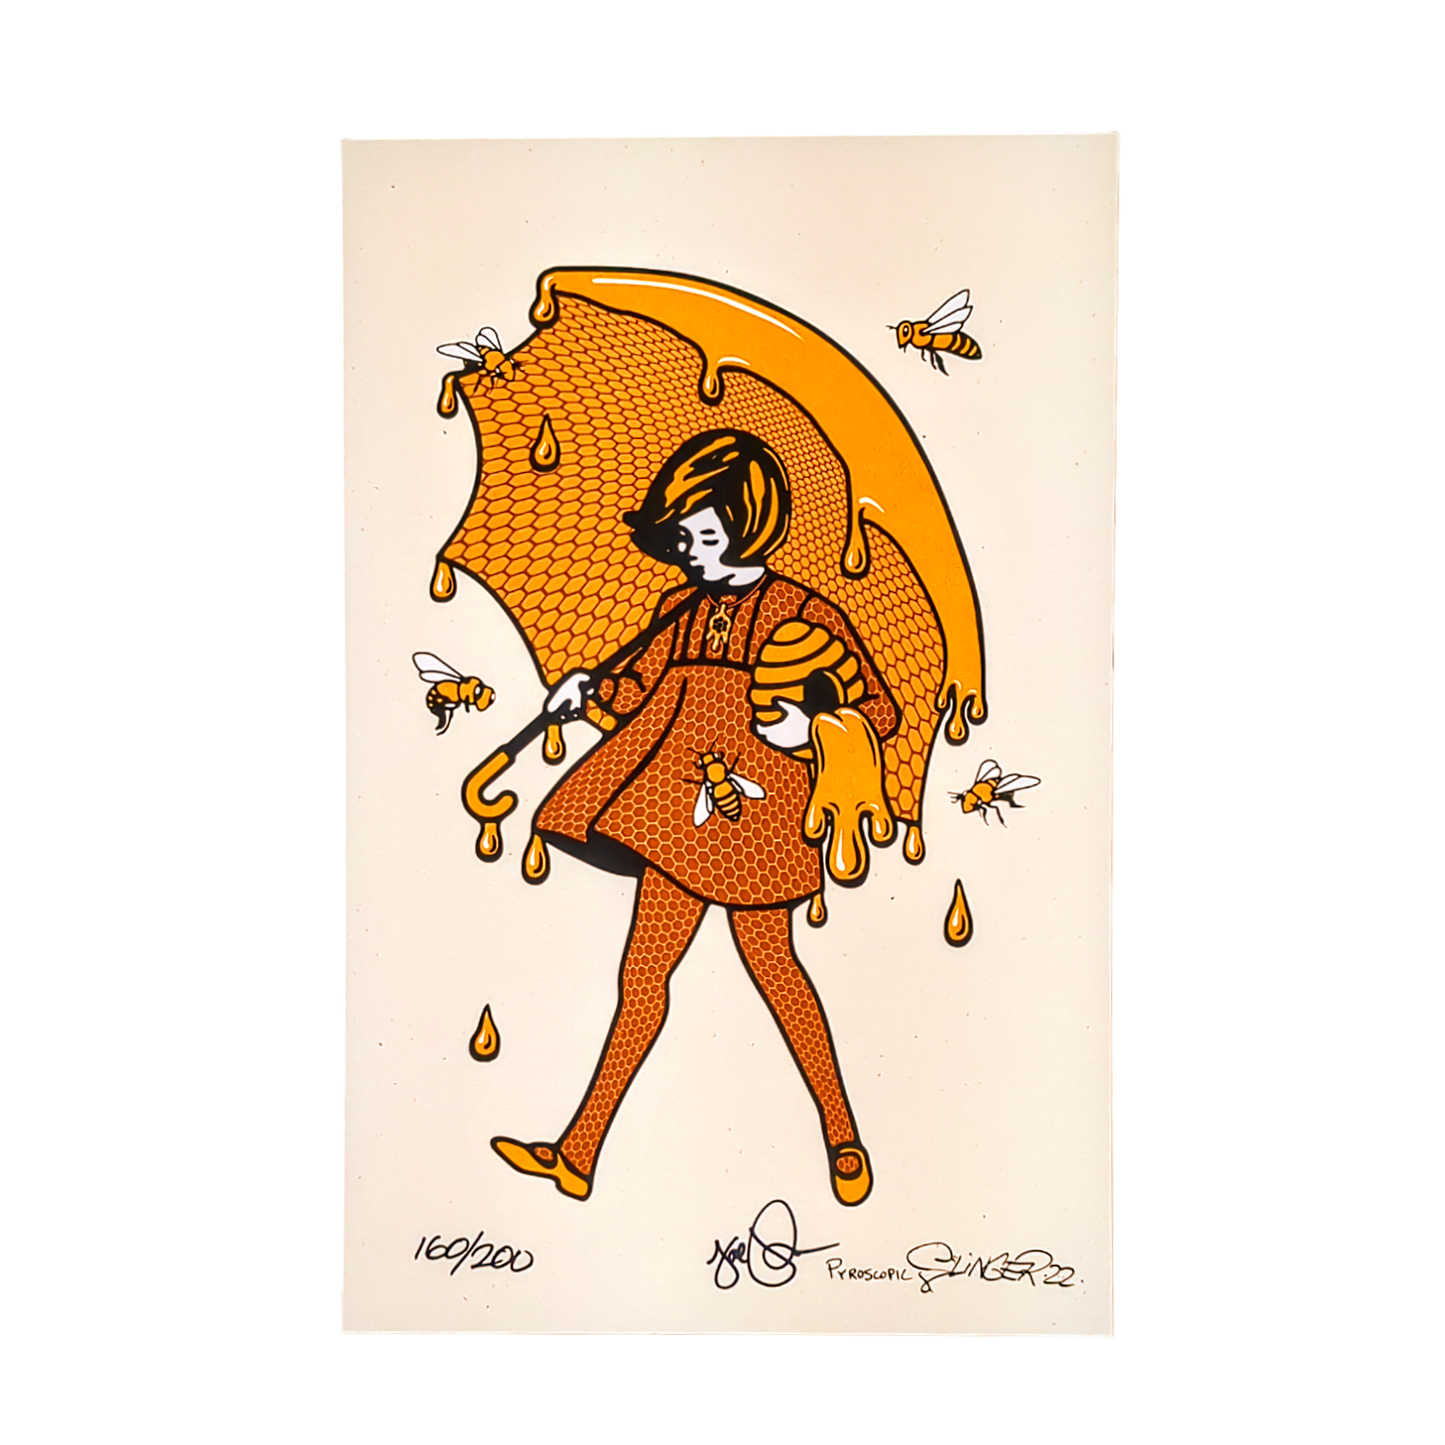 Slinger x Joe P x Pyroscopic Honey Girl, 2022 Screen Print on Antique Ivory Archival Paper 11 x 17 in Edition of 200  Signed, Numbered + Dated by the artists.